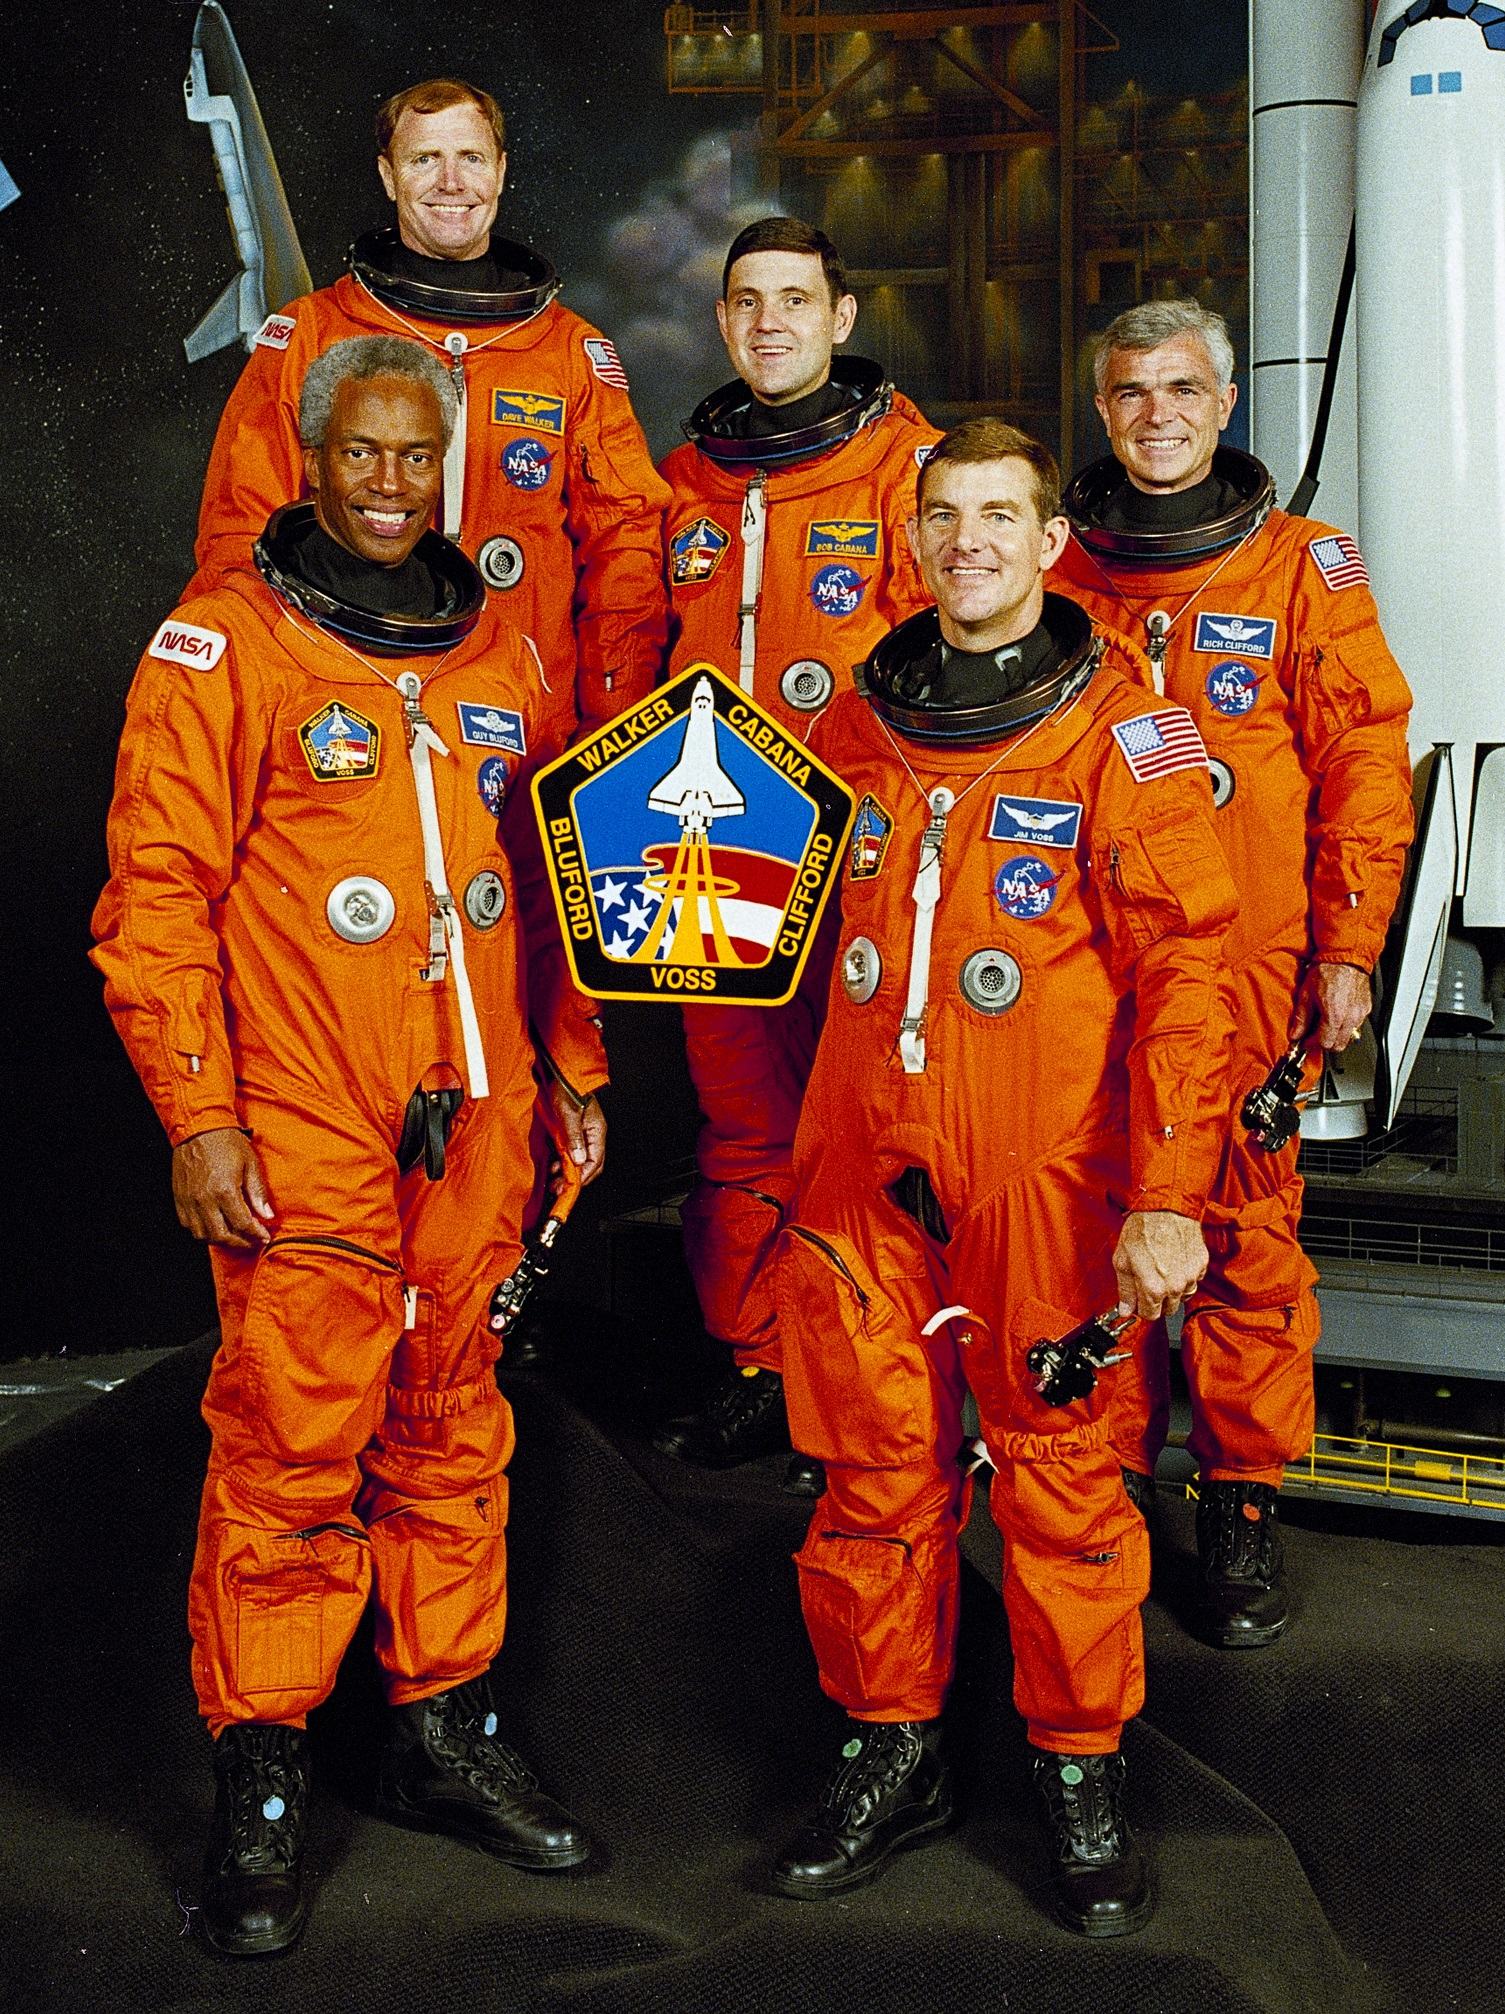 Space Shuttle Discovery (STS-53) flight crew. Front row, left to right: Guion S. Bluford and James S. Voss. Back row, David M. Walker, Robert D. Cabana and Micael R. Clifford. (NASA)